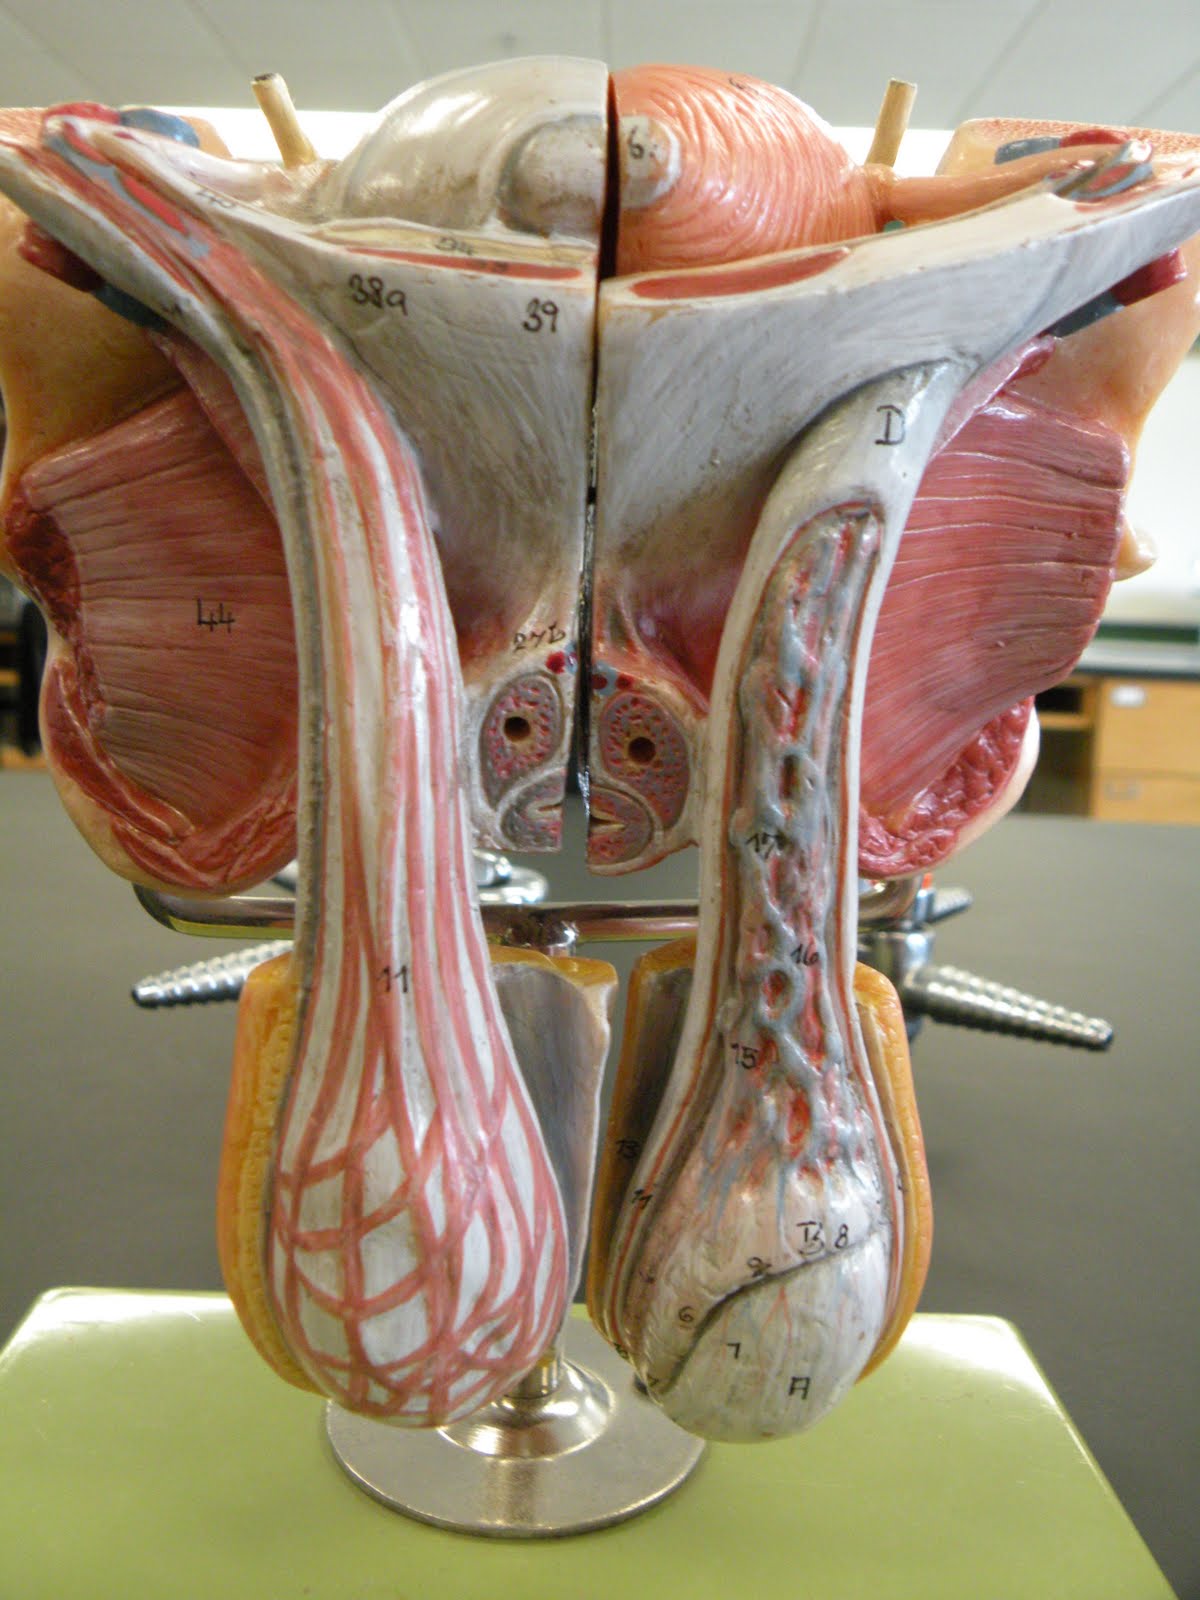 PSC: Anatomy and Physiology 2: Reproductive System Lab